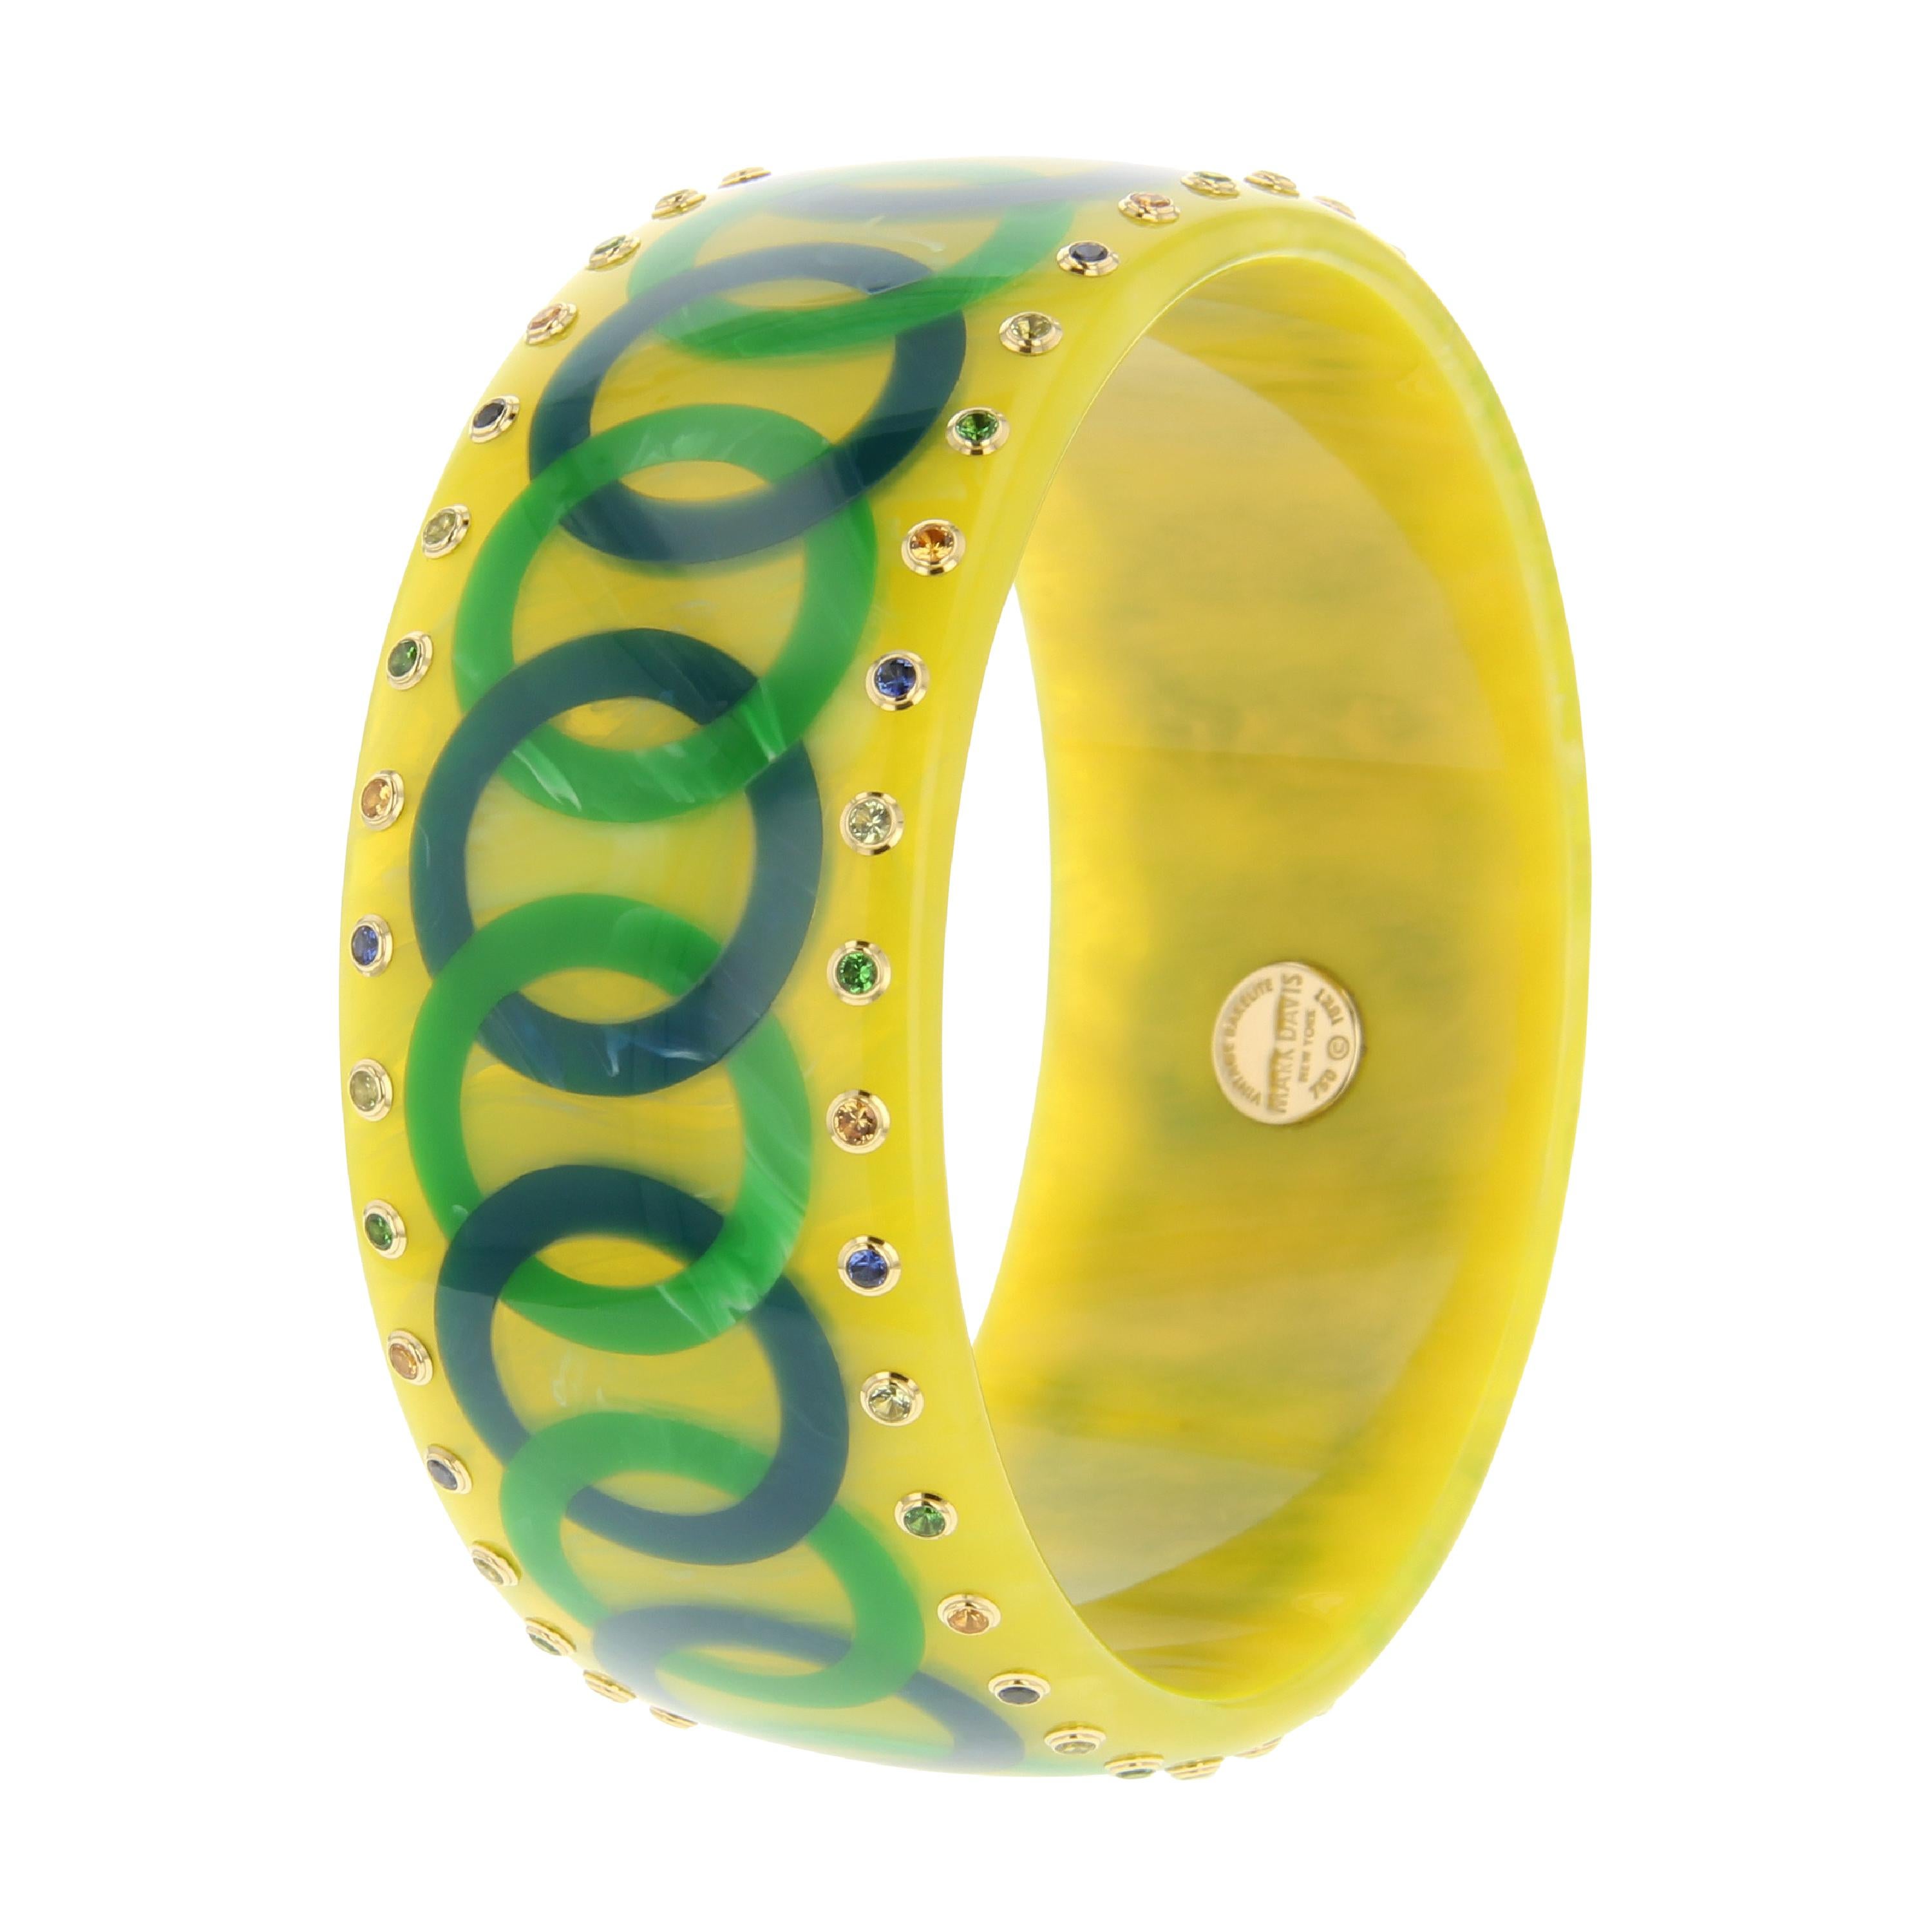 This vintage yellow bakelite bangle by Mark Davis was created with a pattern of interlocking blue and green bakelite links that circle the bangle in an endless chain. The process of inlaying the bangle perfectly was technically challenging and the